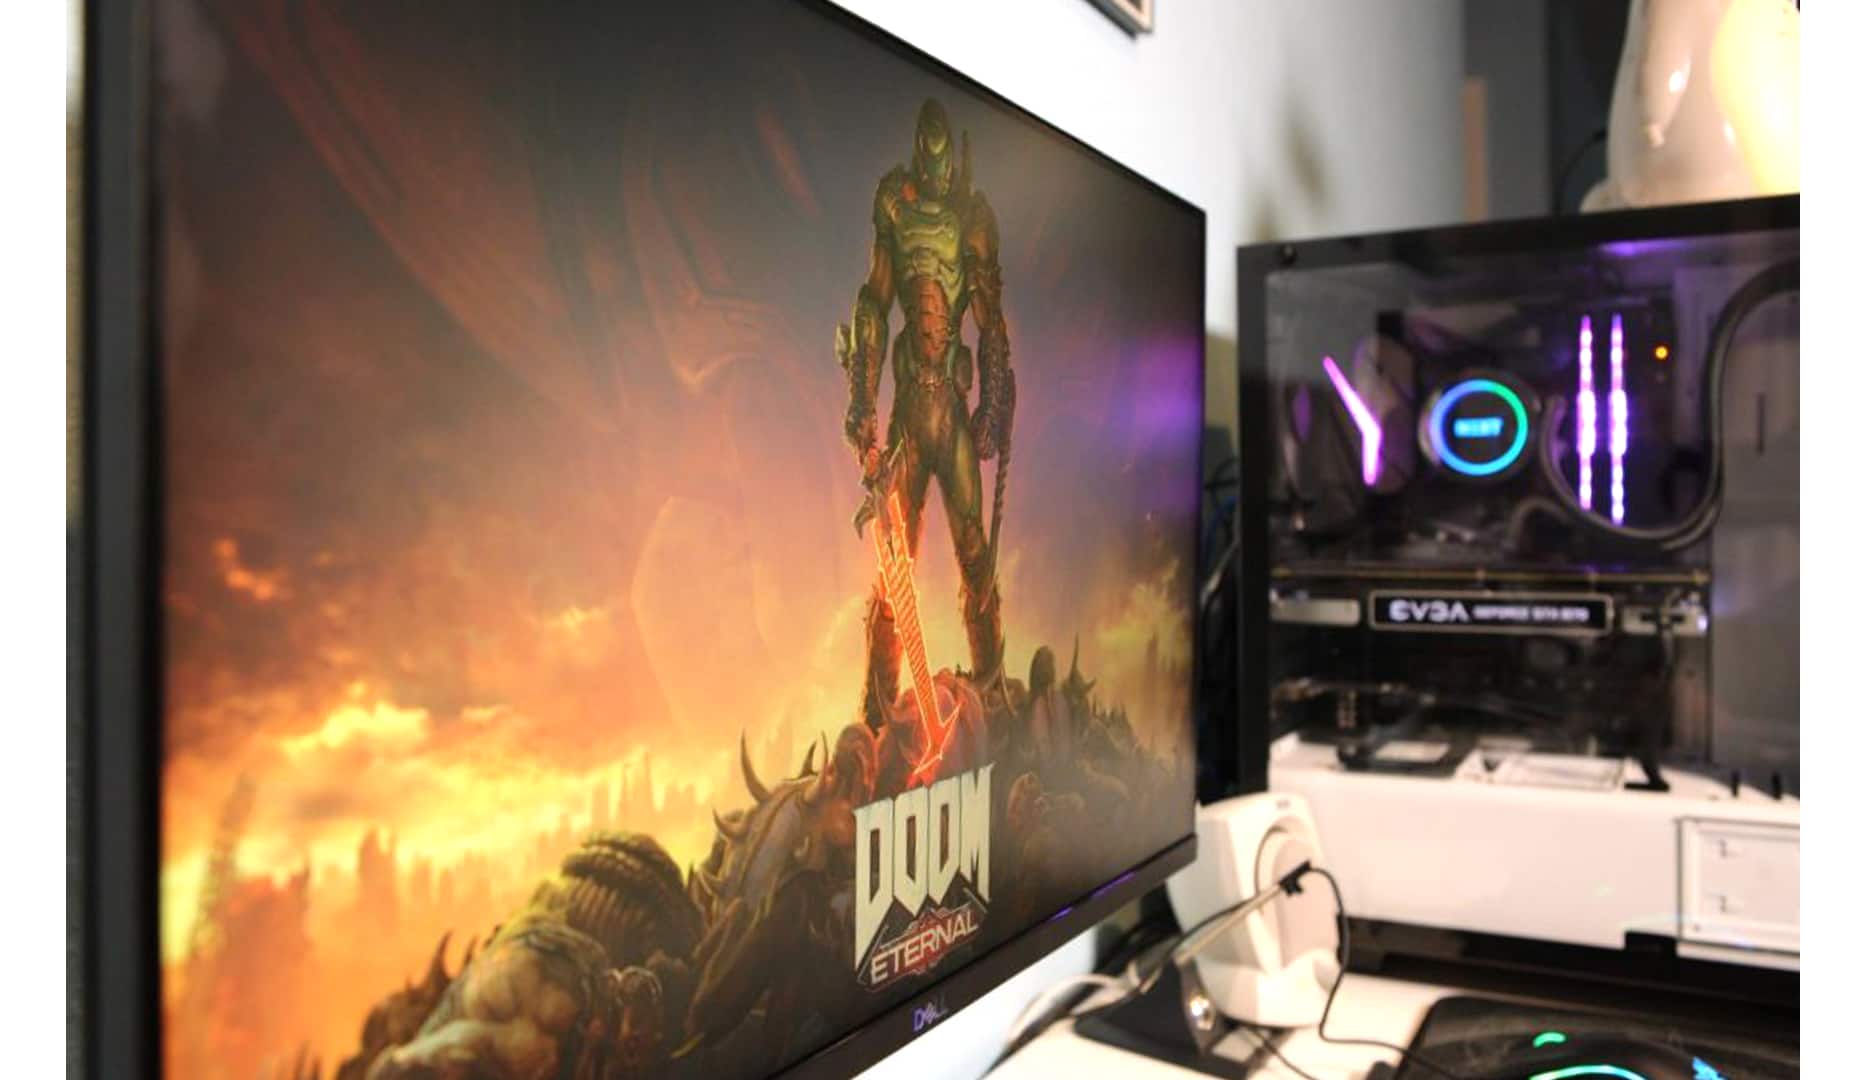 Dell 24 Gaming Monitor Hands-On Review